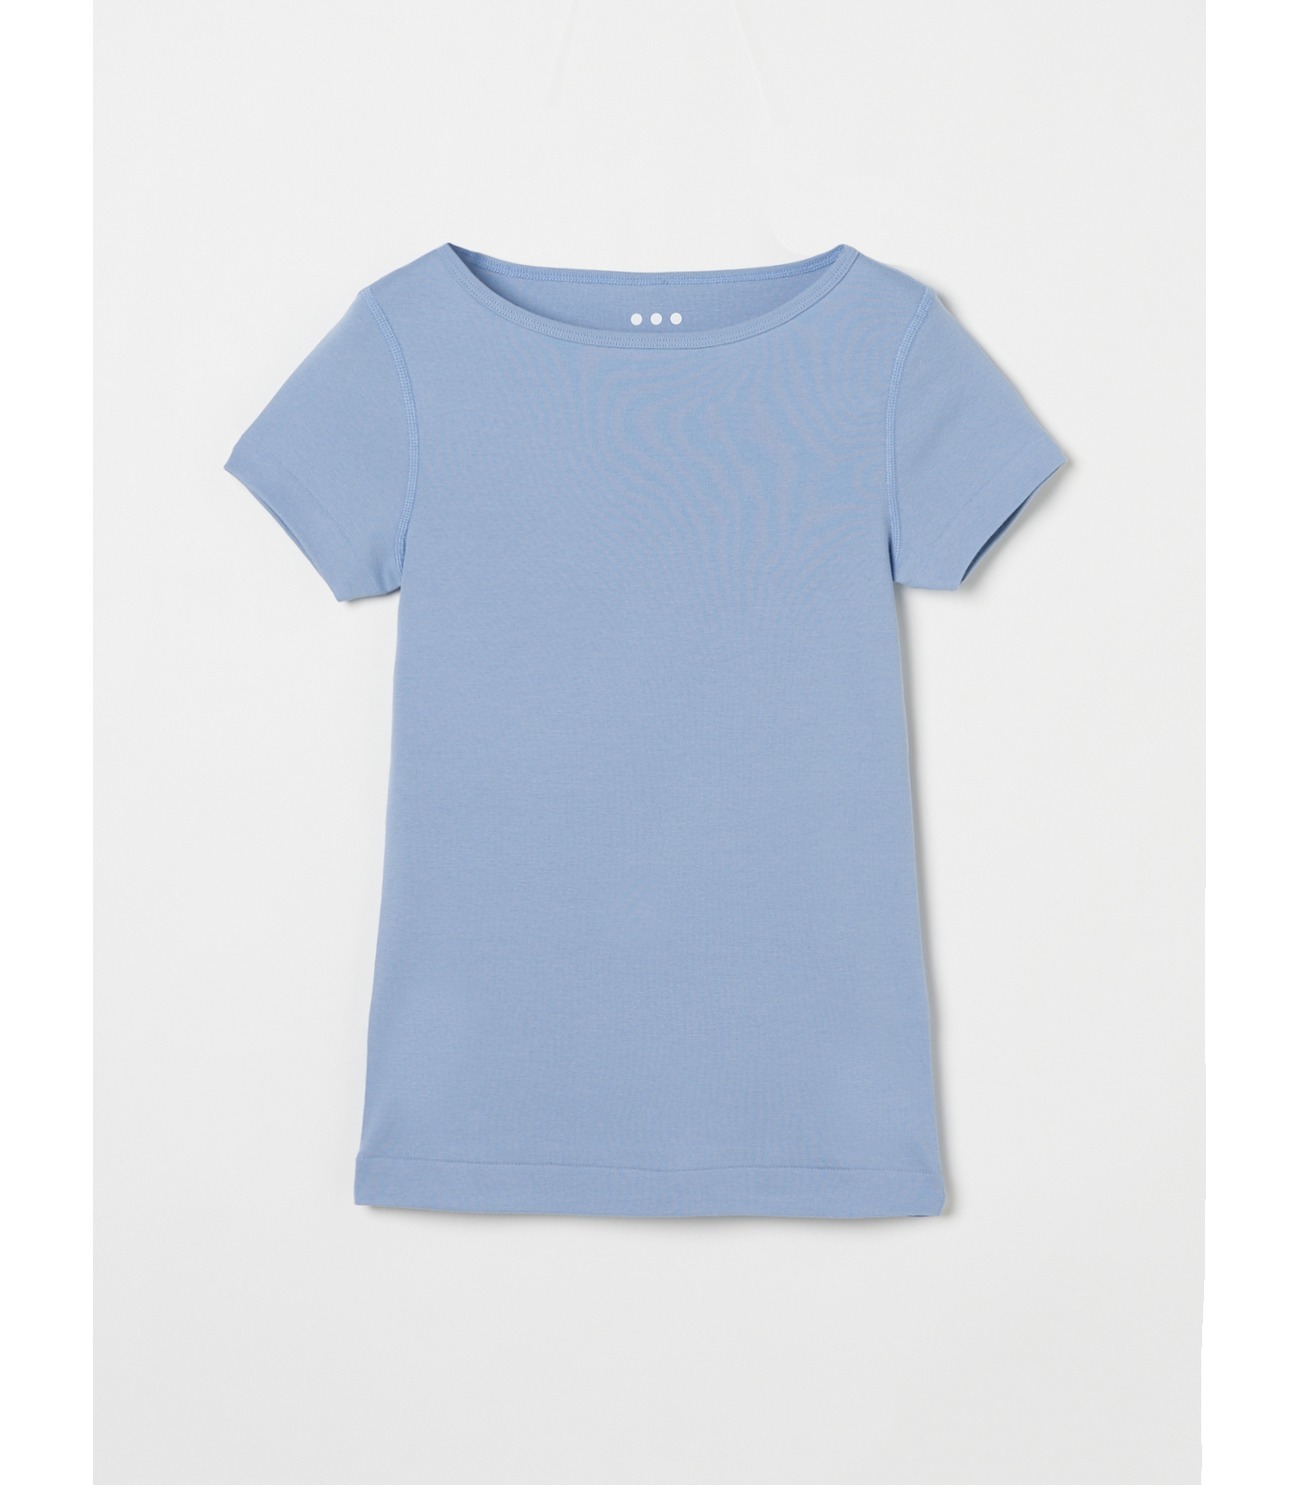 Organic cotton Knit s/s ginger 詳細画像 cloudy blue 2